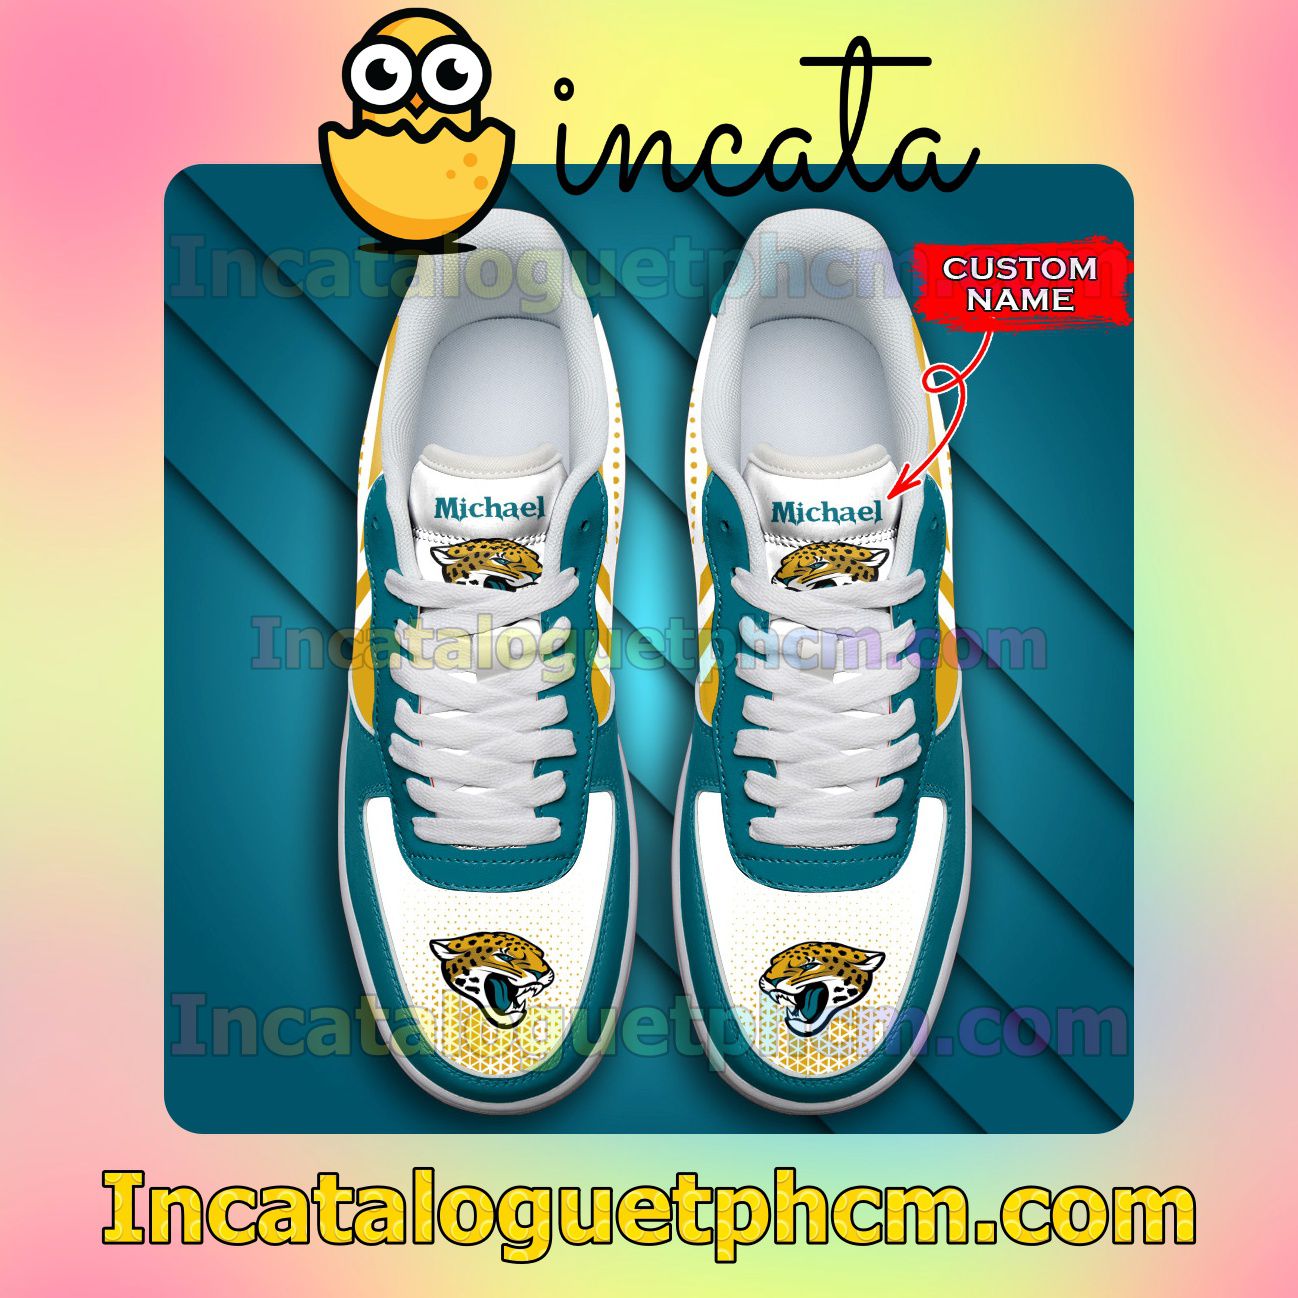 Cheap Personalized NFL Jacksonville Jaguars Custom Name Nike Low Shoes Sneakers